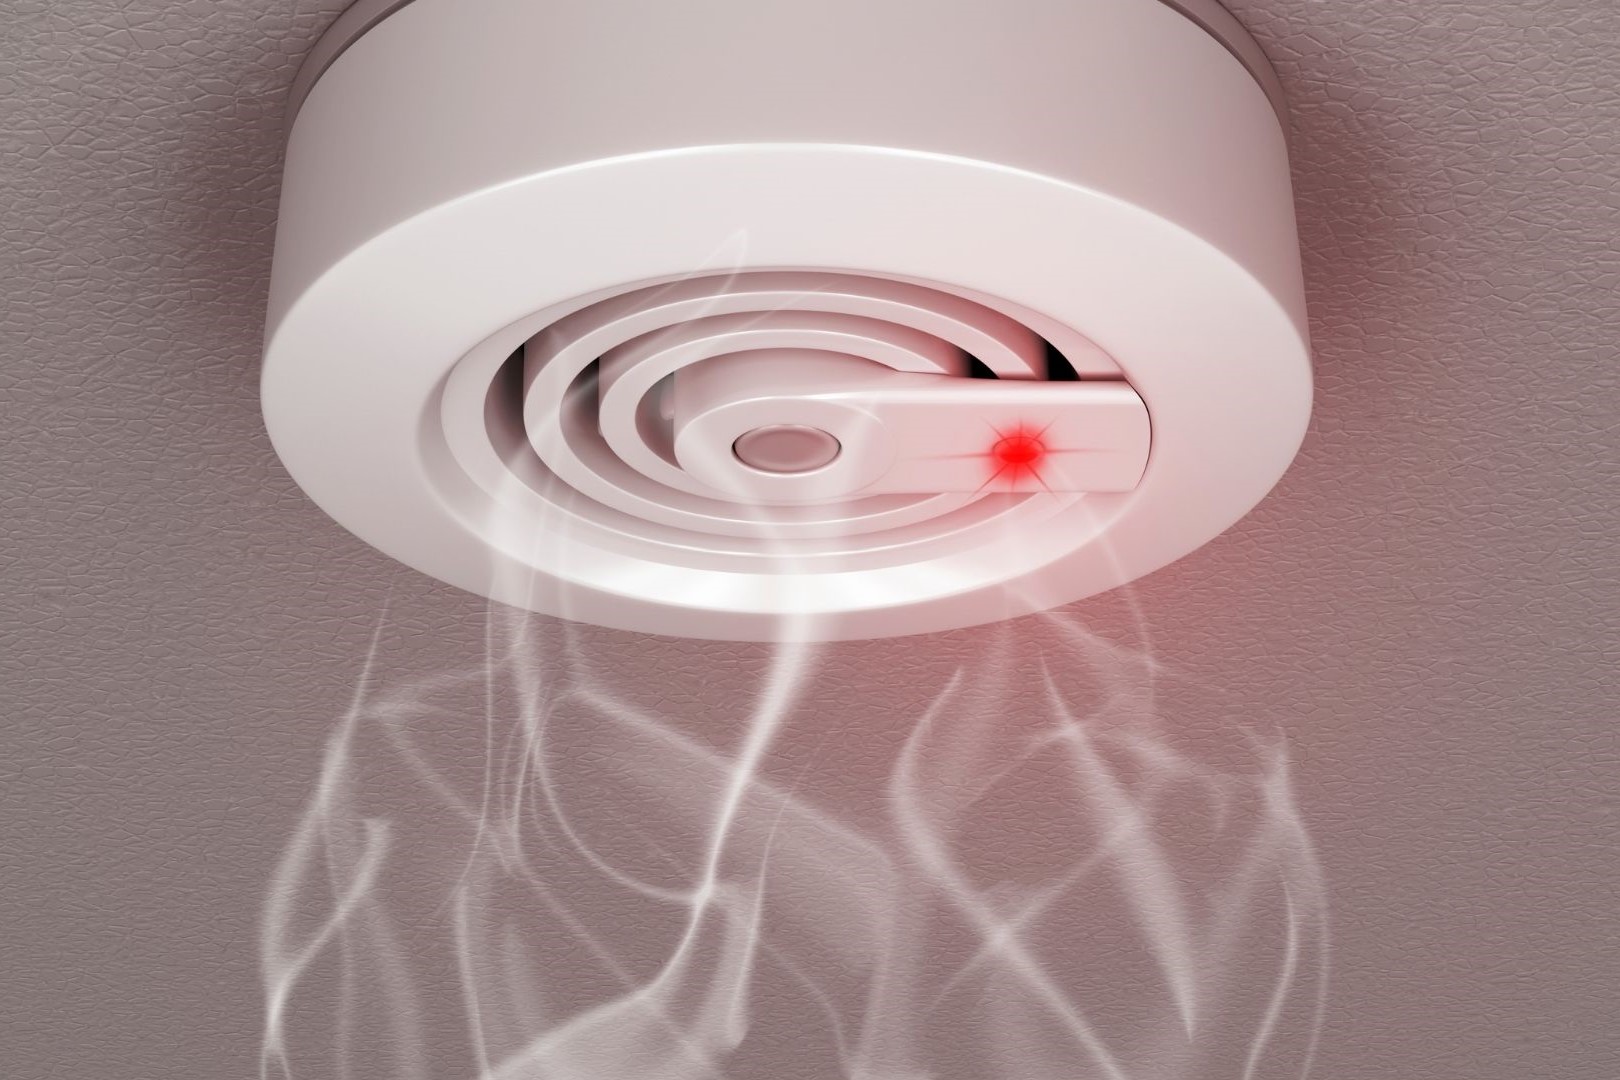 Newly Installed Smoke Detector Alarm Flashing Red – Here’s Why!